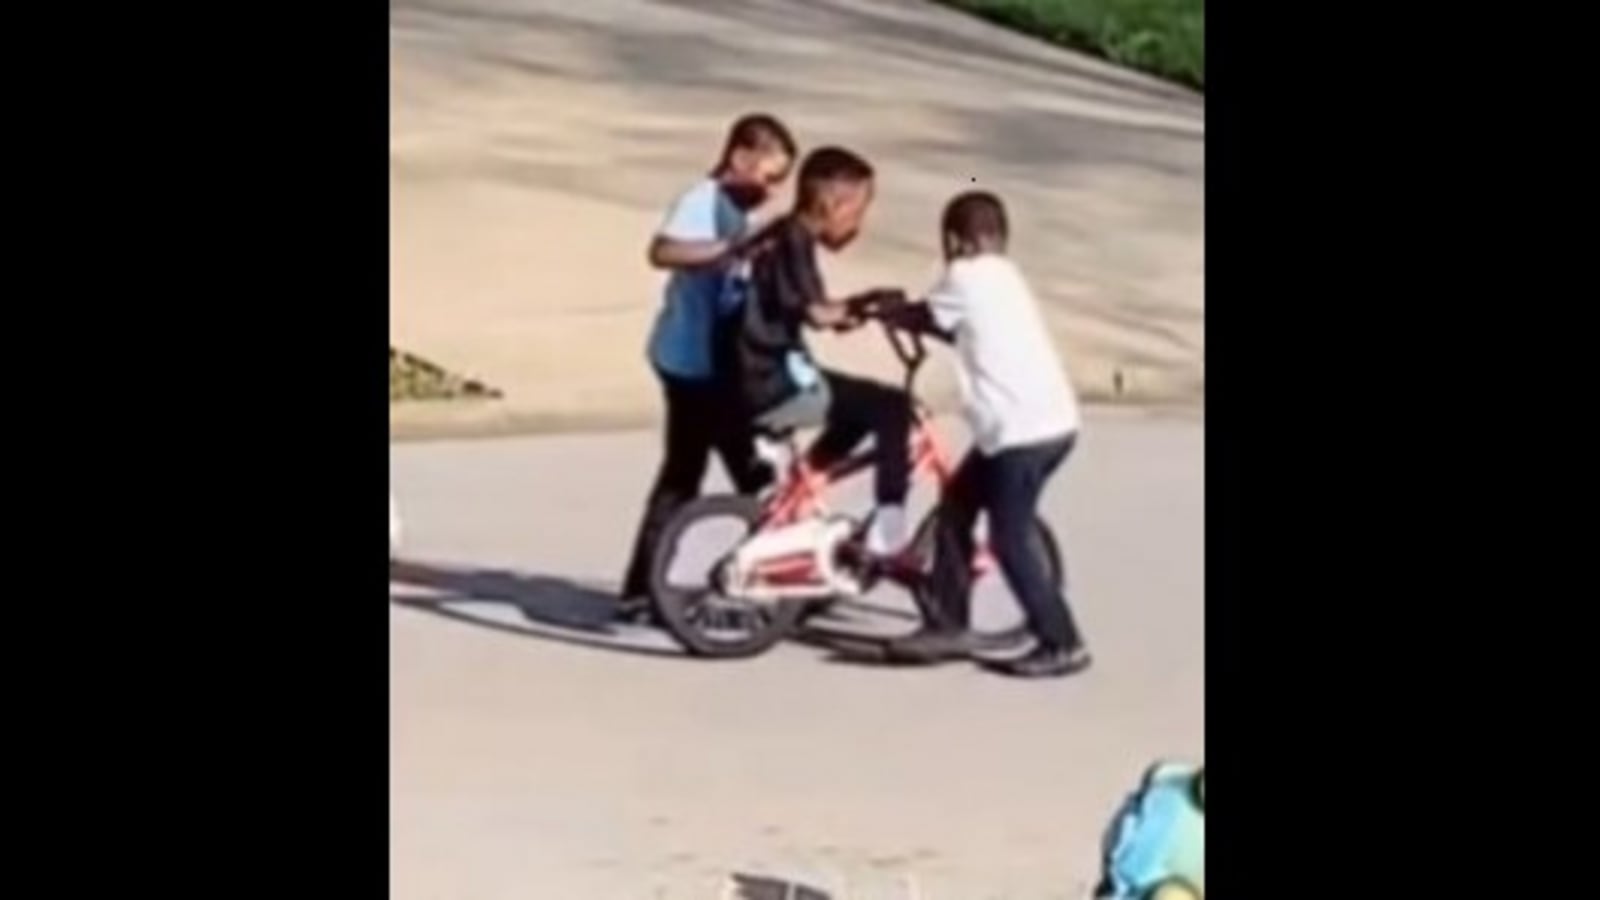 Little kids help their neighbourhood friend learn how to ride a bicycle ...